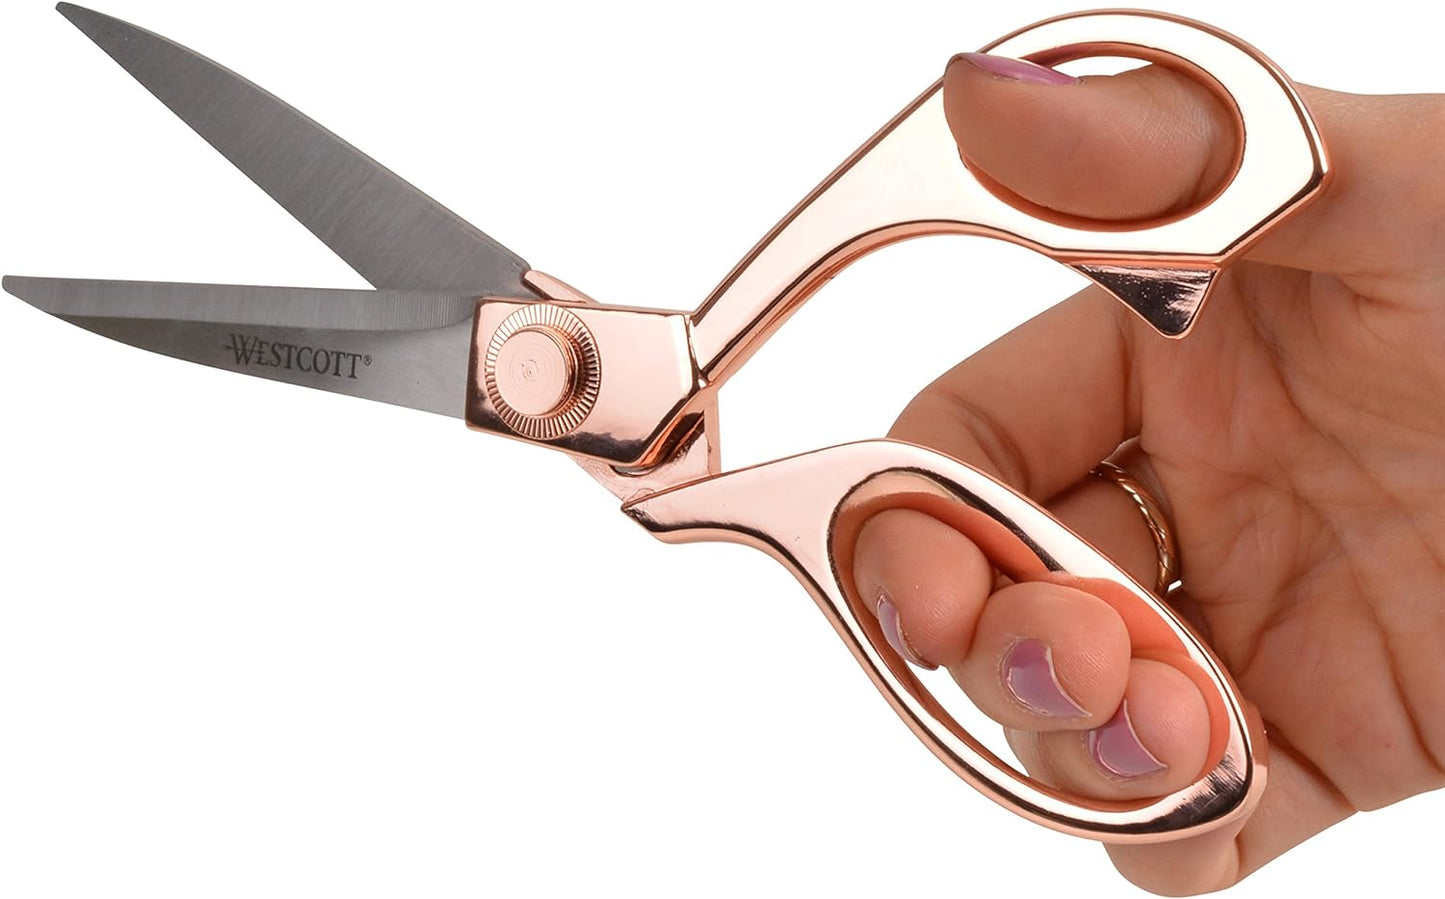 KD 8" Scissors Stainless Steel Rose Gold Scissors For Office and Home